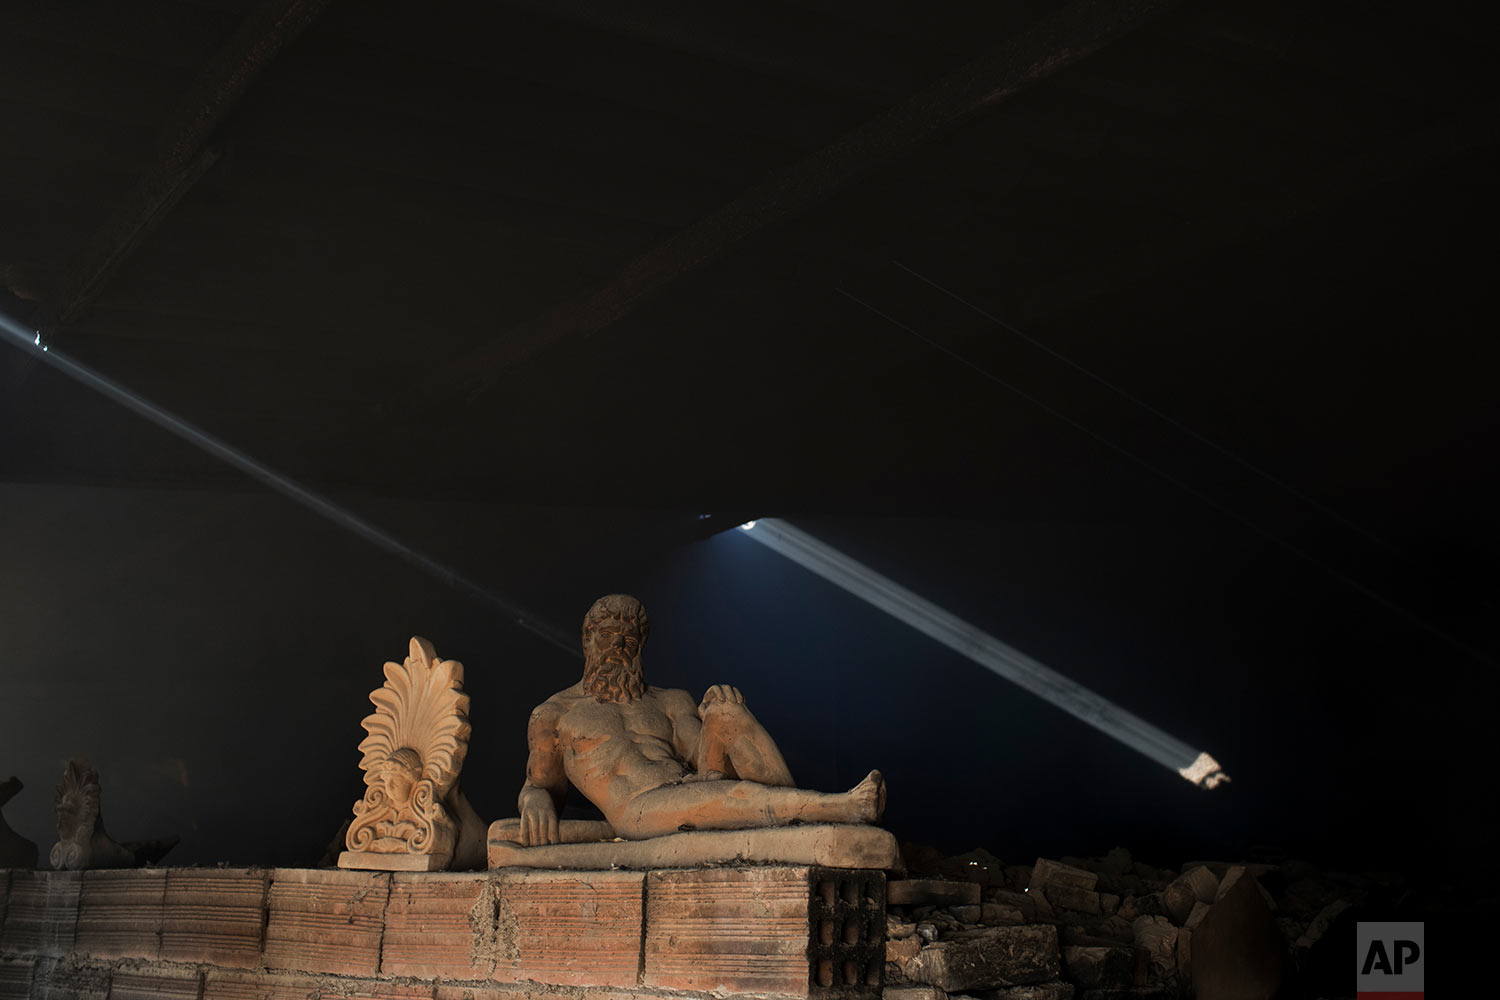  In this Friday, Nov. 20, 2017 photo, a sooty, dust-covered terracotta statue of Greek mythological hero Hercules, a son of Zeus, stands on top of a burning furnace next to an antefix in Haralambos Goumas' sculpture and ceramic workshop, in the Egaleo suburb of Athens. (AP Photo/Petros Giannakouris) 